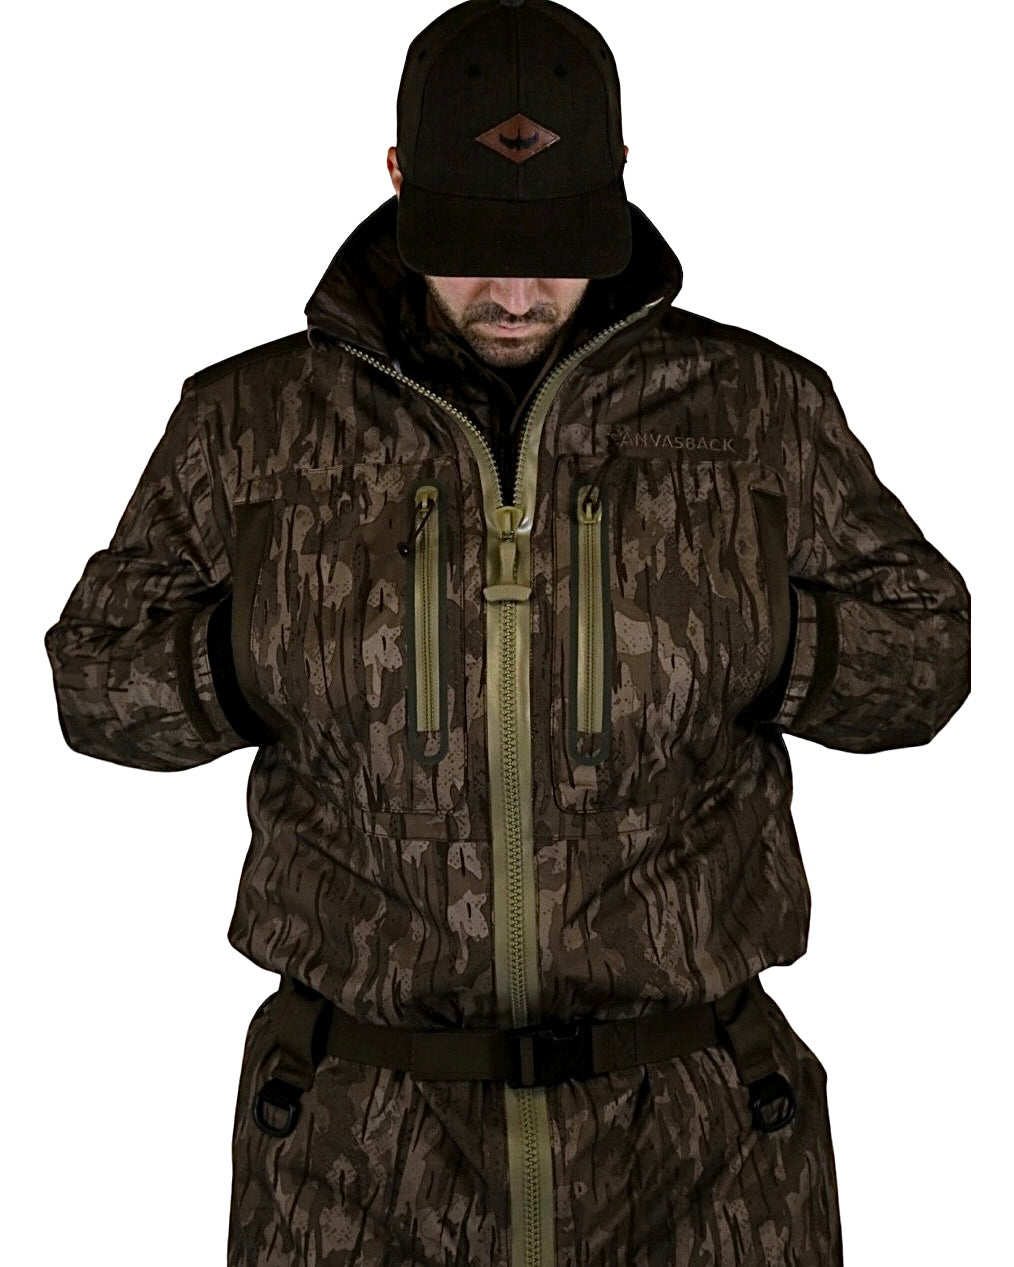 Adult Premium Camo Hoodie - T-shirt Depot and More